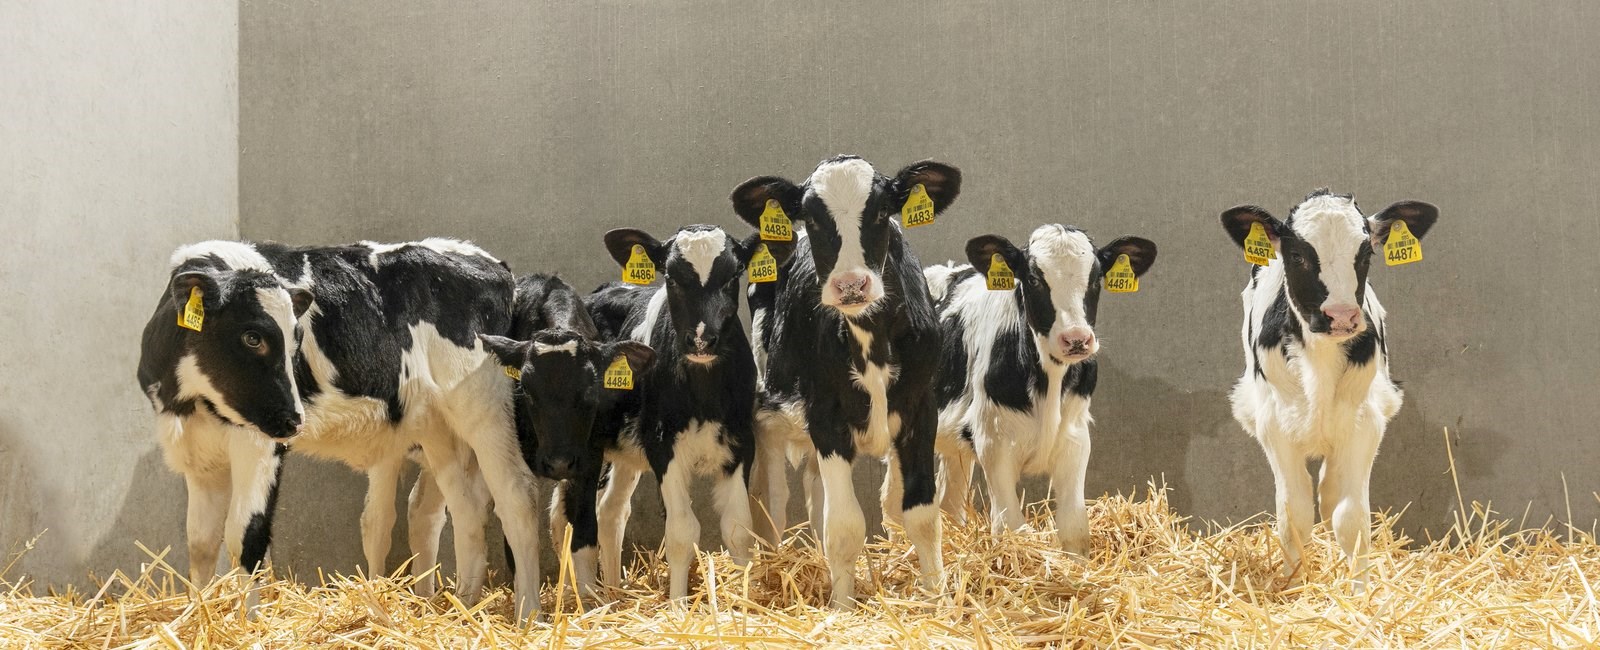 A healthy-looking group of calves, close to weaning